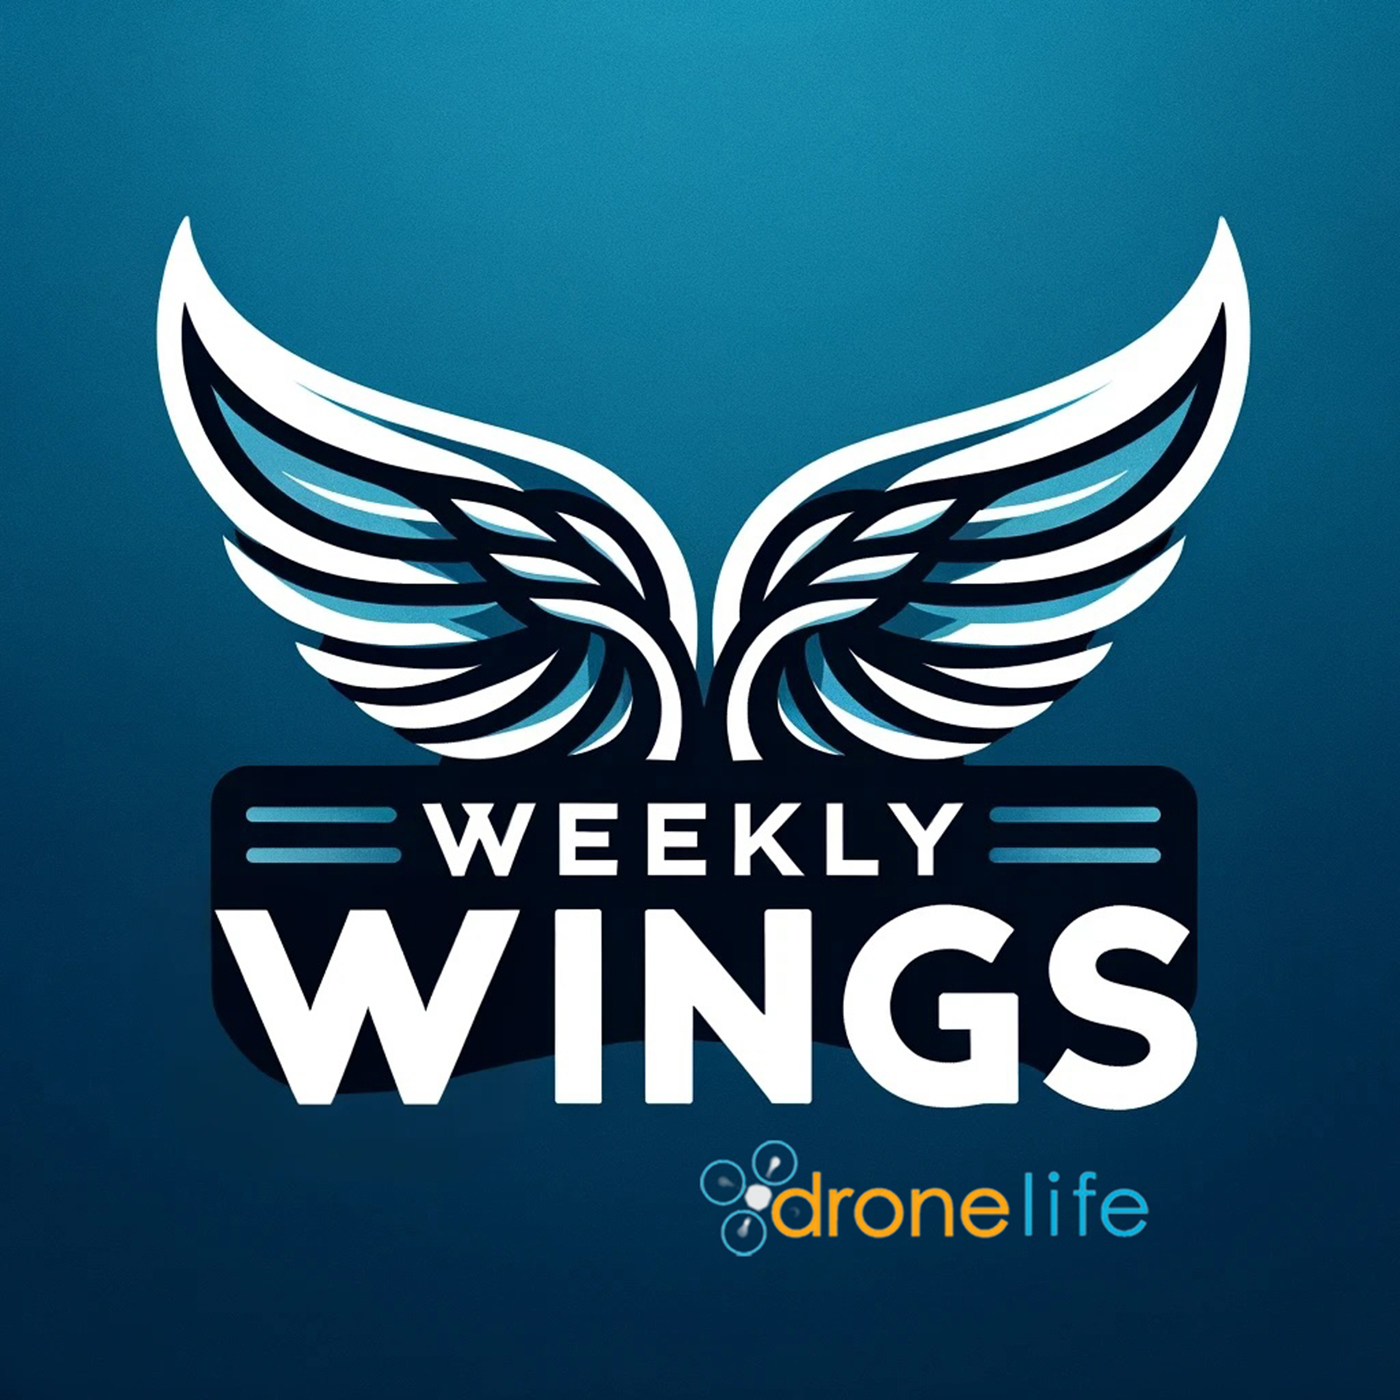 Weekly Wings: DroneLife.com Image